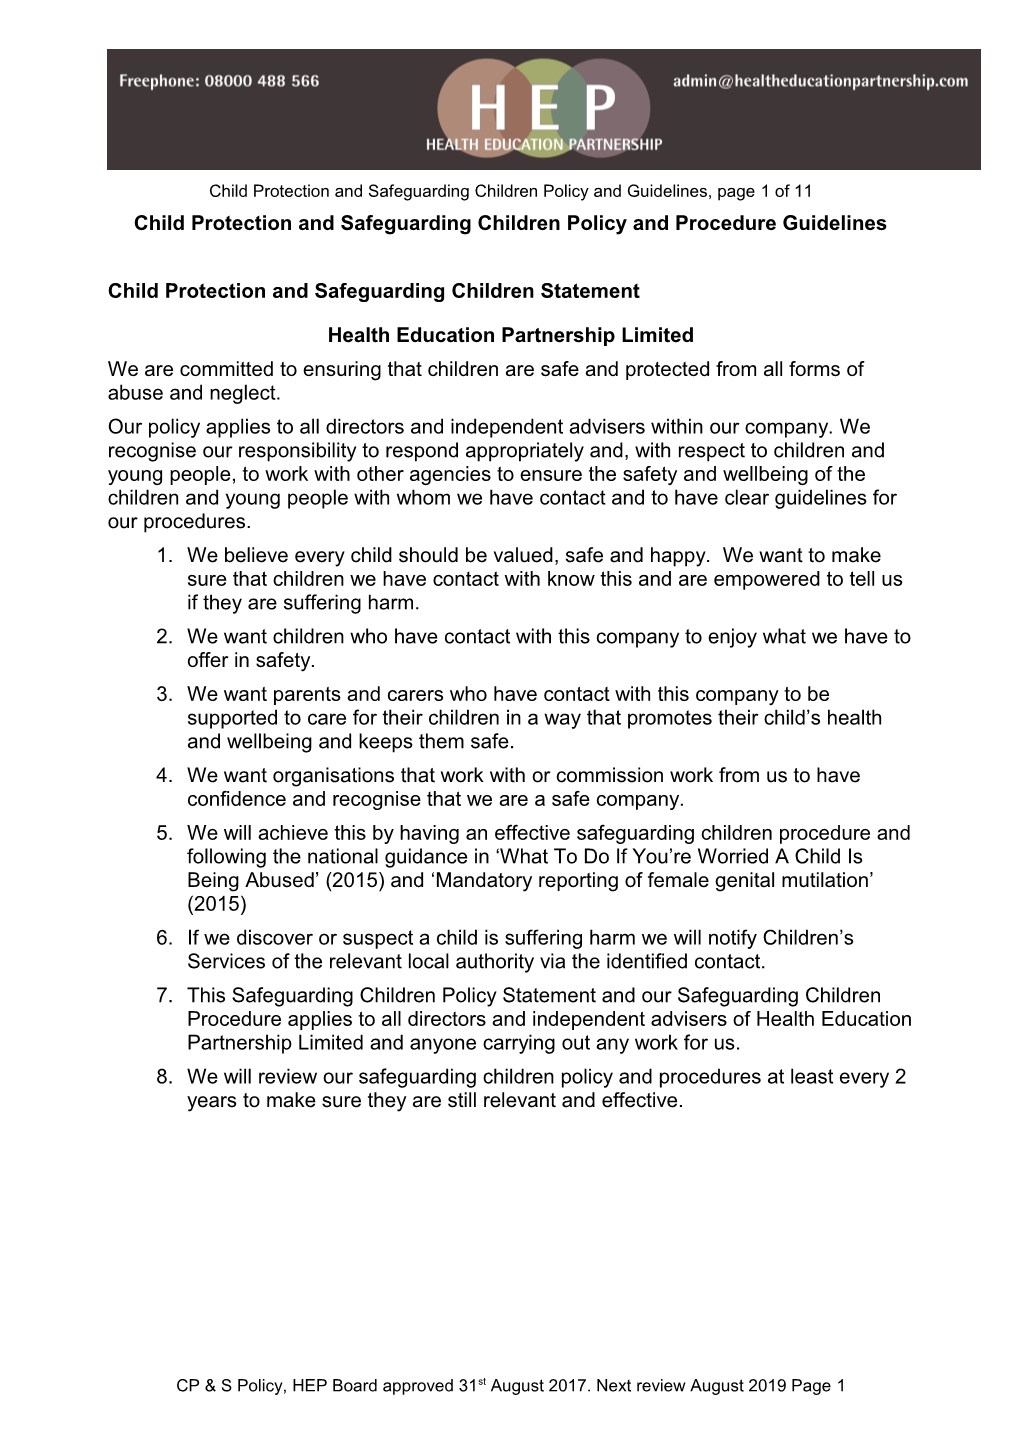 Child Protection and Safeguarding Children Policy and Procedure Guidelines